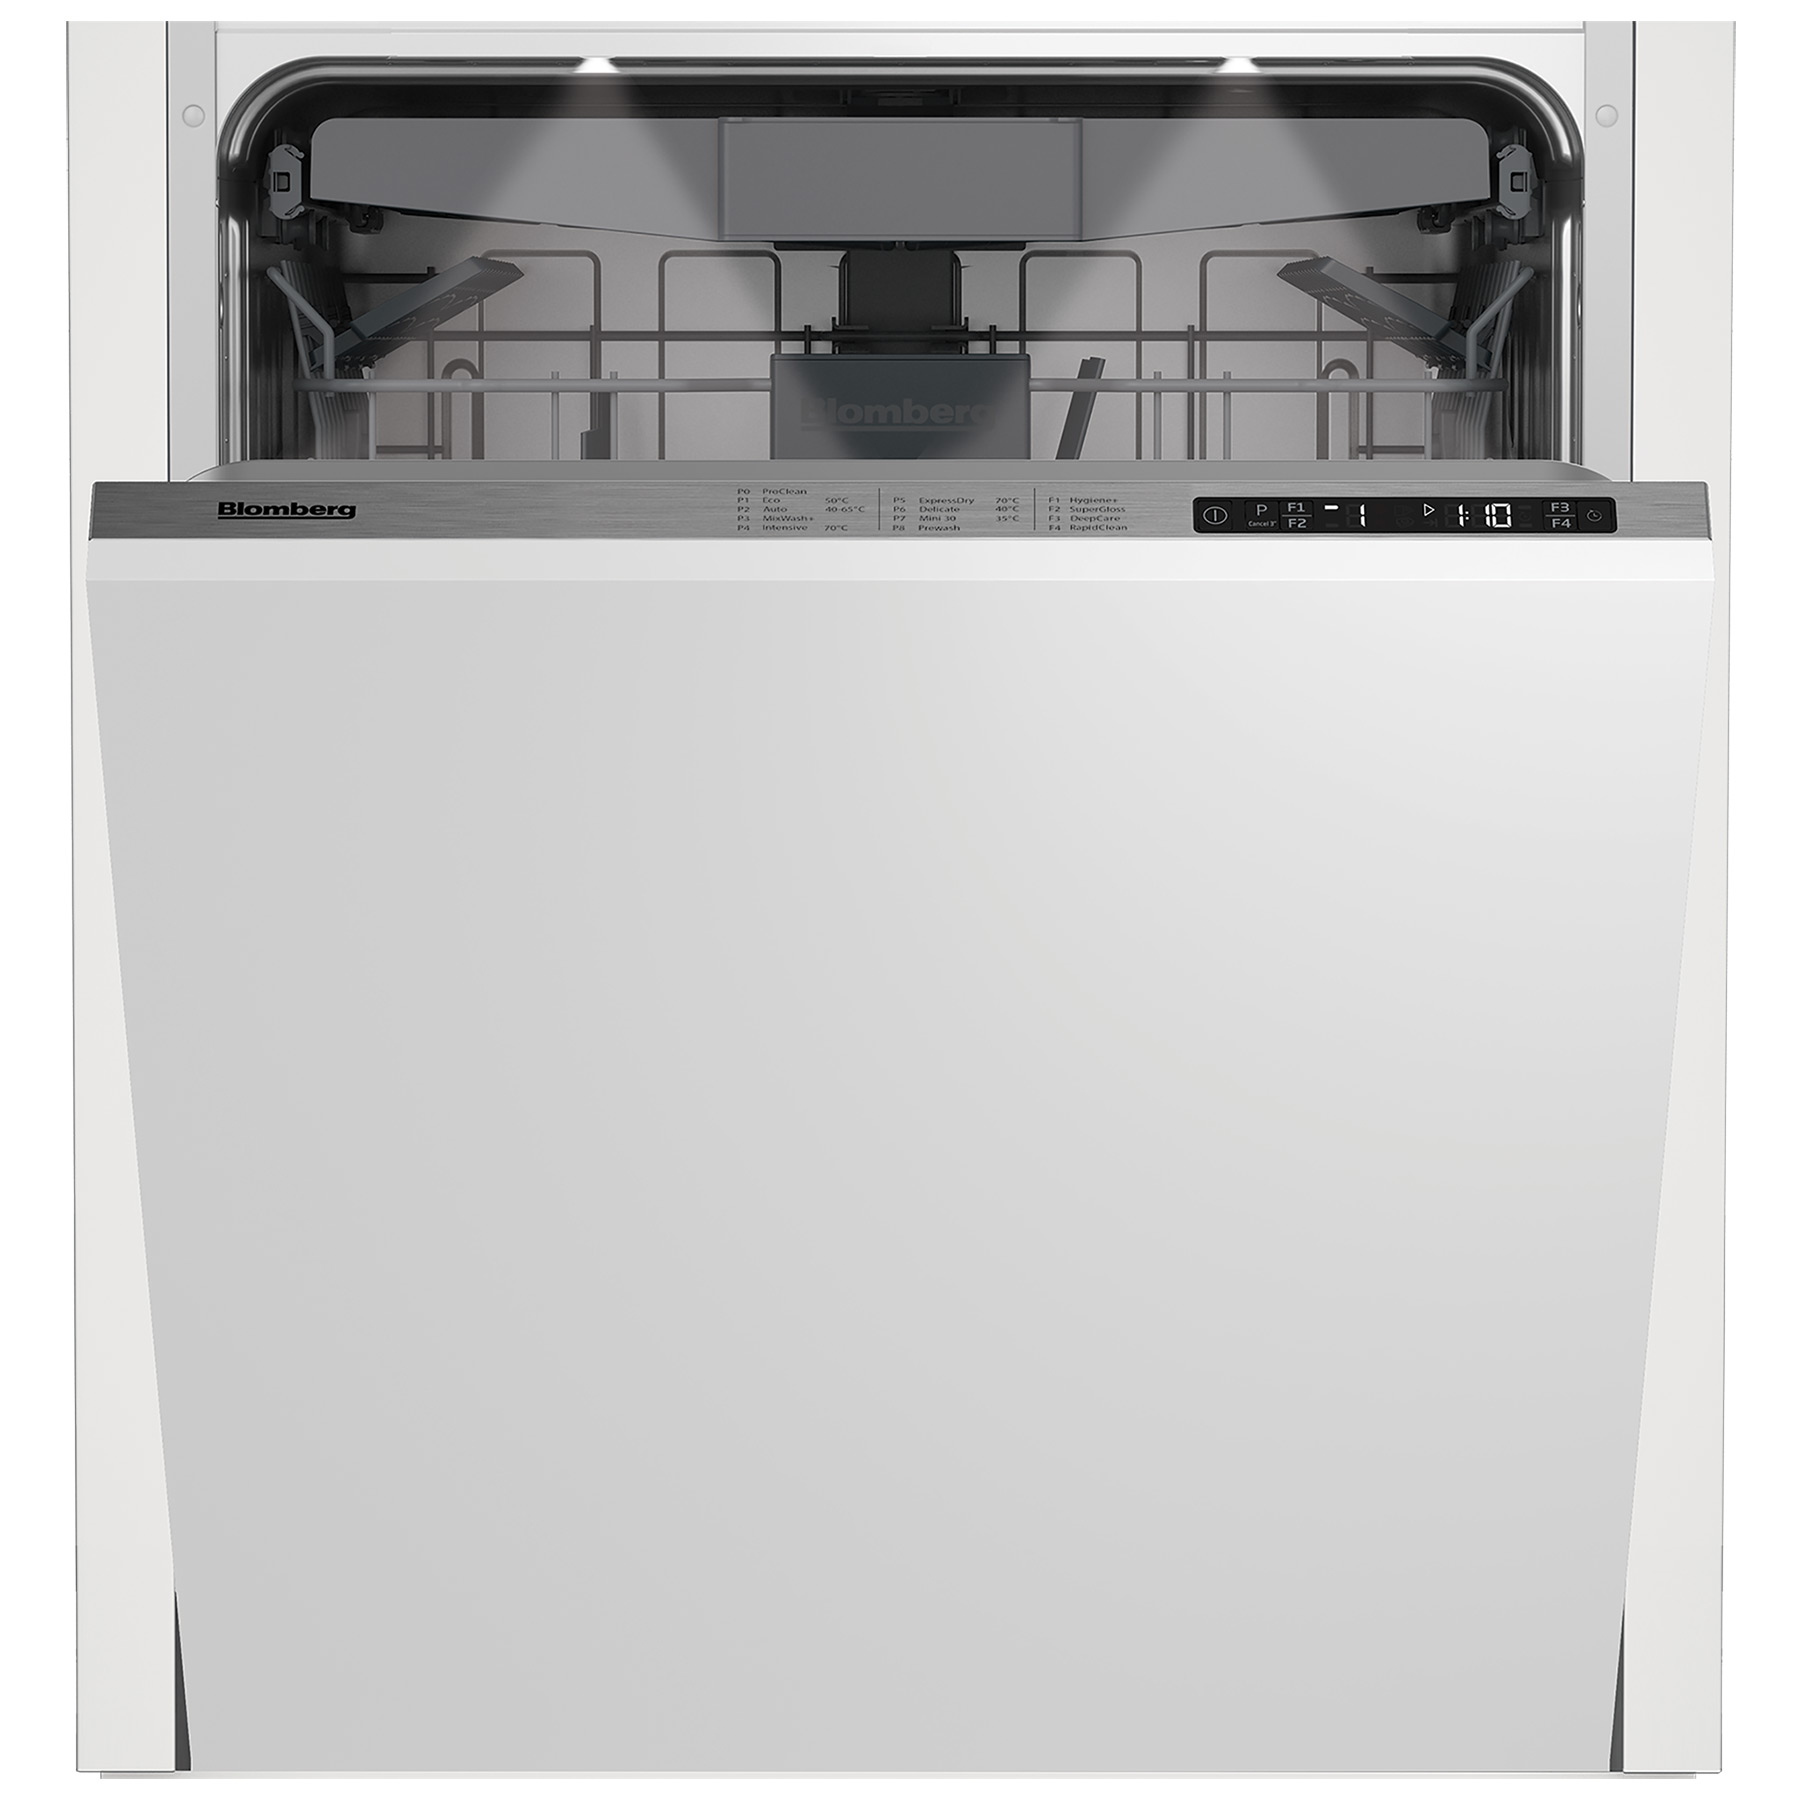 Photos - Dishwasher Blomberg LDV63440 60cm Fully Integrated  16 Place C Rated 